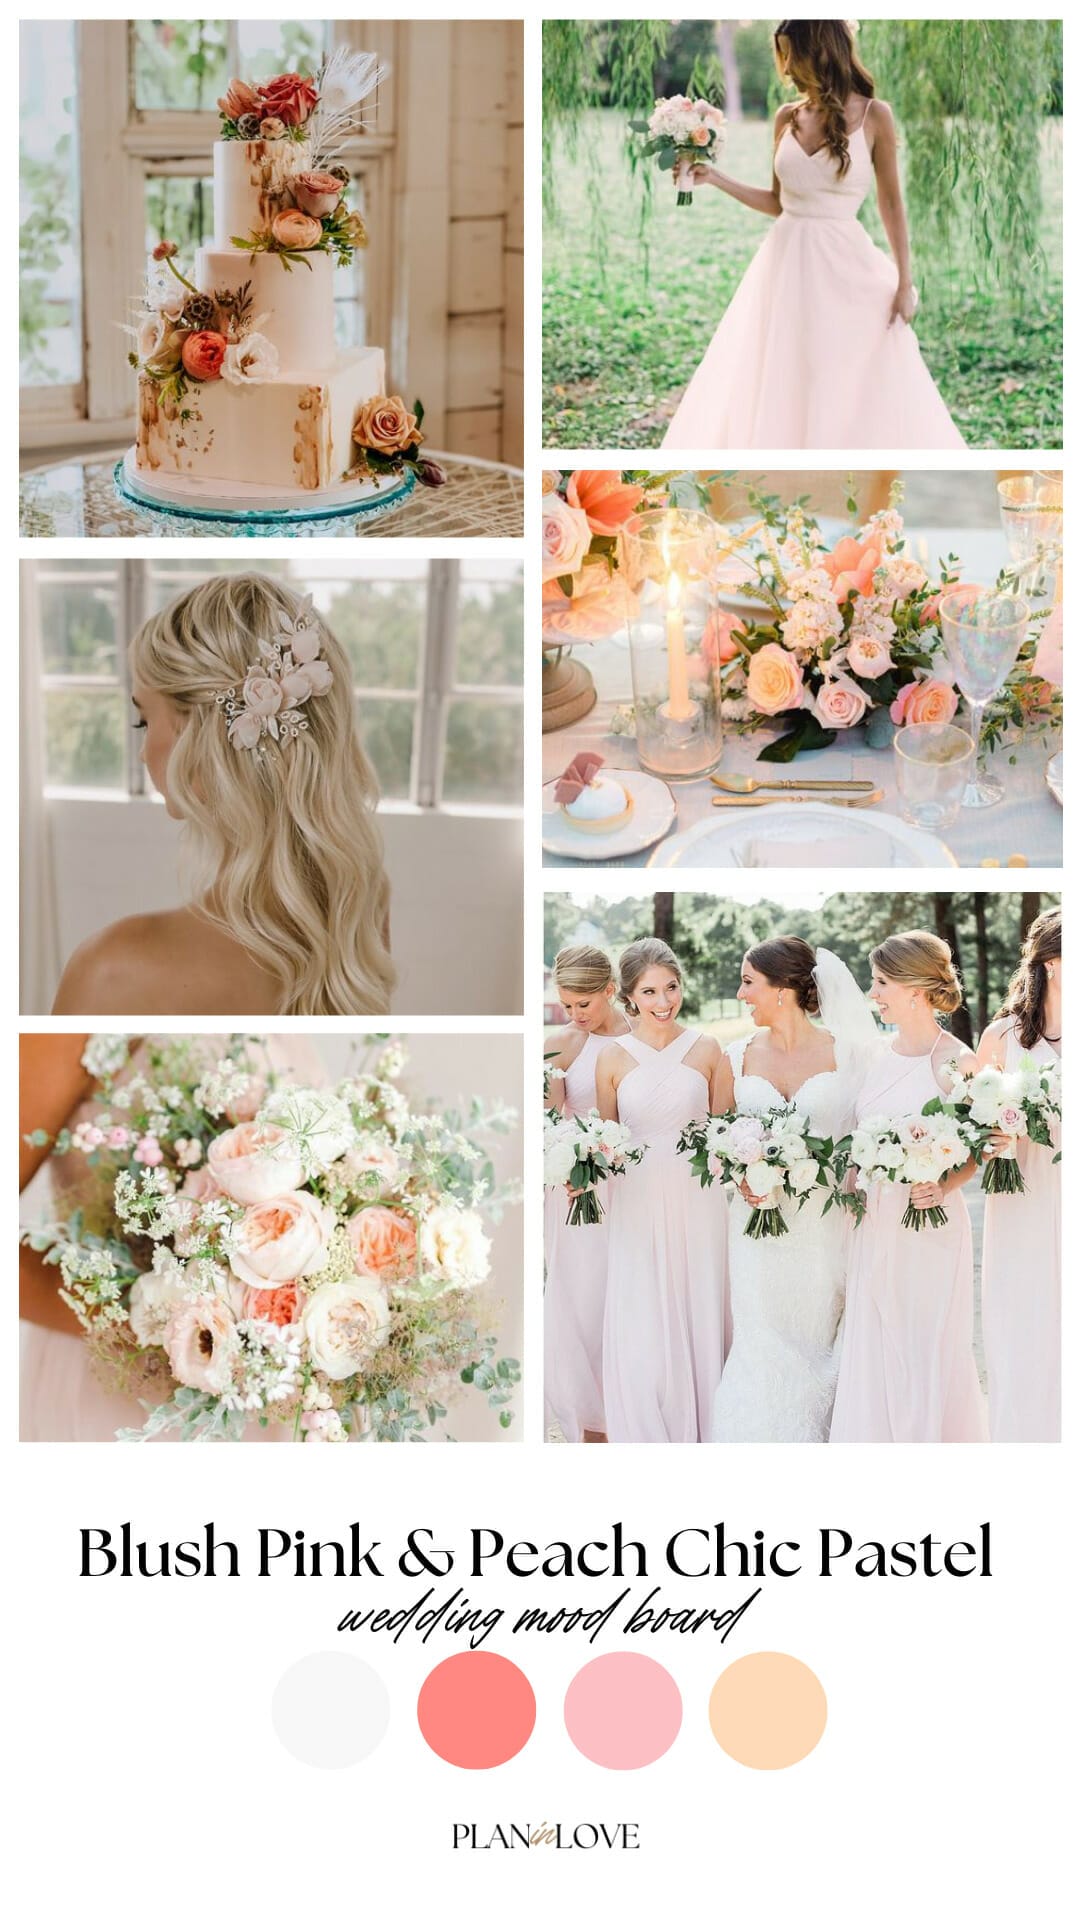 Blush Pink And Peach Chic Pastel Wedding Mood Board Inspiration Color Palette Plan In Love